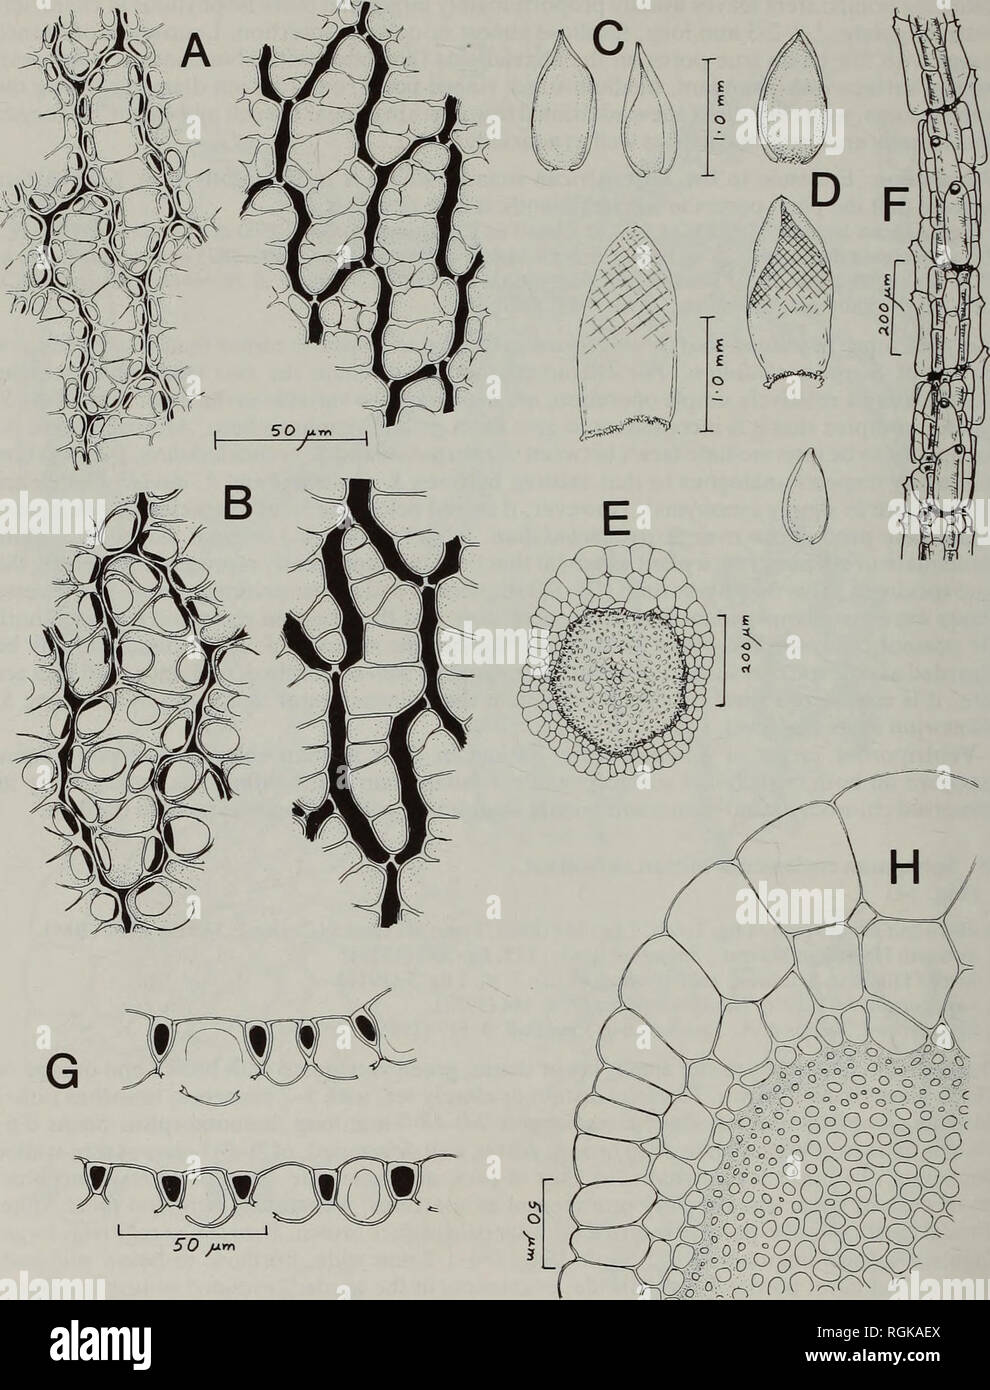 . Bulletin of the British Museum (Natural History) Botany. 136 ALAN EDDY. â Â£0 o o vu&gt;(cucb&amp; Fig. 34 Sphagnum ceylonicum Mitten ex Warnst. A, B, abaxial (left) and adaxial (right) surfaces of branch leaves; C, D, branch leaves (upper figs) and stem leaves (lower figs) and one pendent-branch leaf (lowermost fig.); E, transverse section of stem (low magnification); F, branch cortex; G, transverse section of branch leaves, H, transverse section of stem (A, C, G drawn from the type of S. keniae; the remainder from the type of S. ugandense).. Please note that these images are extracted from Stock Photo